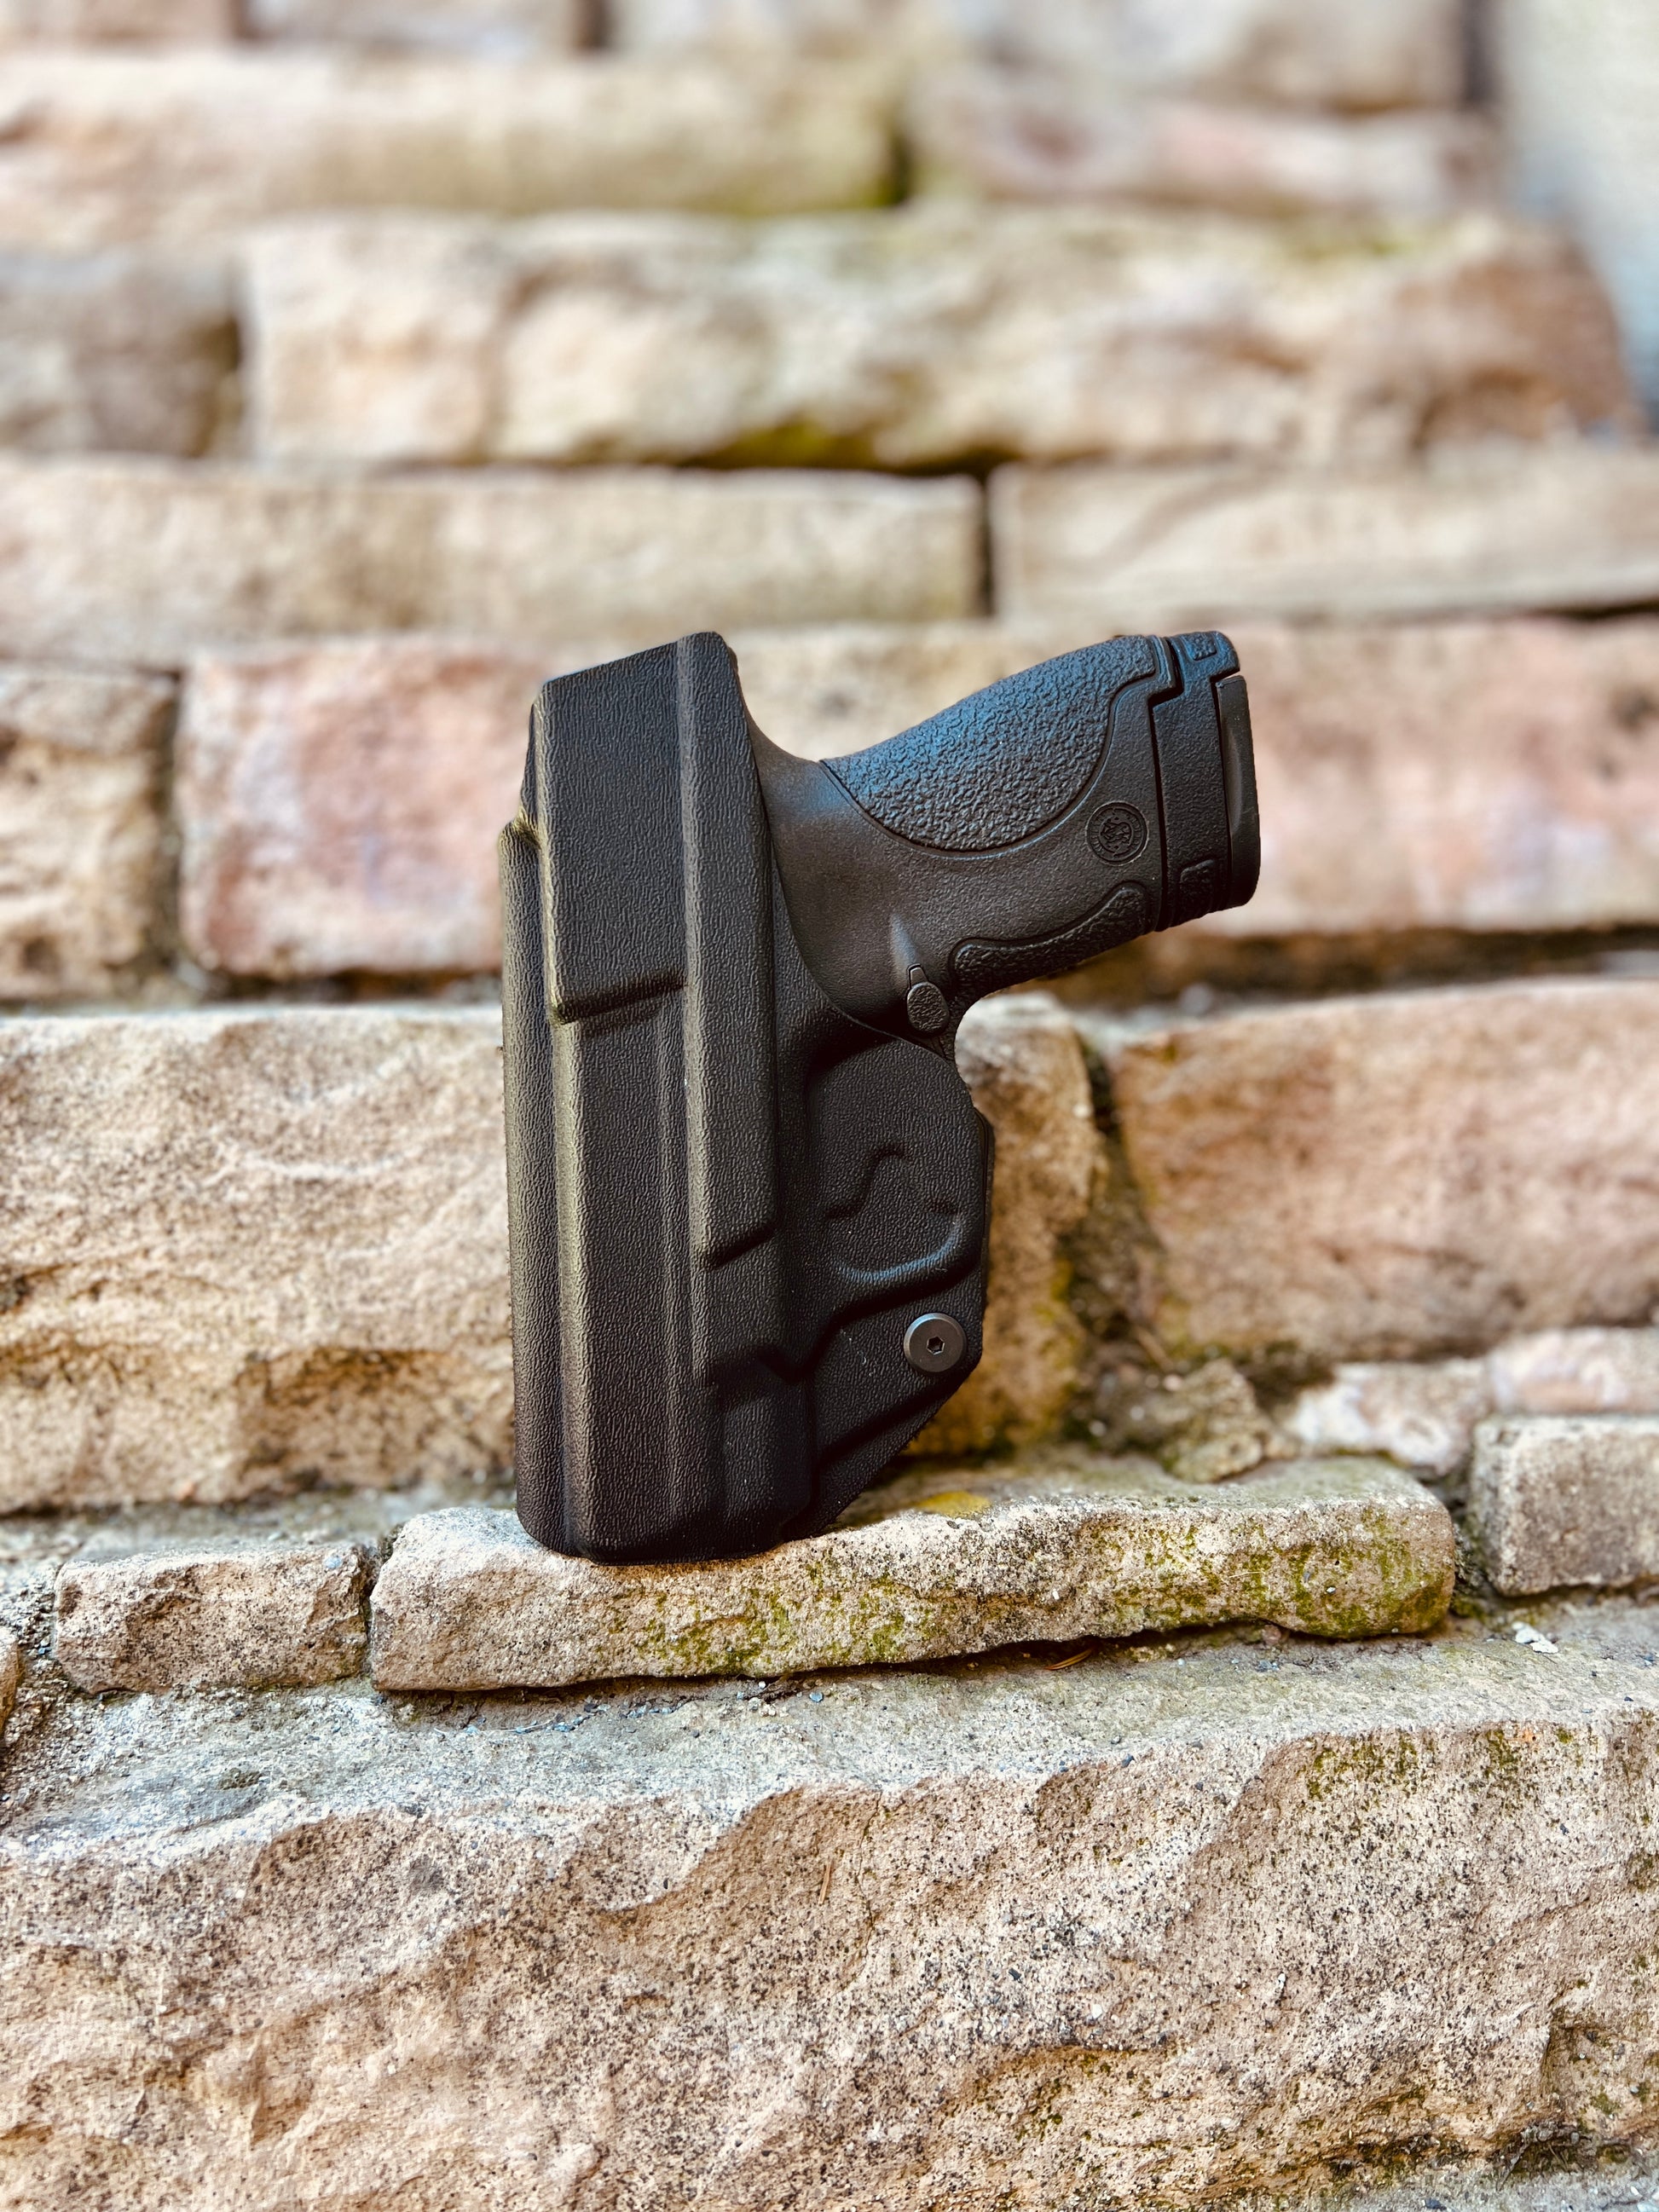 Inside the Waistband Kydex Holster UltiClip - Kydex Holsters